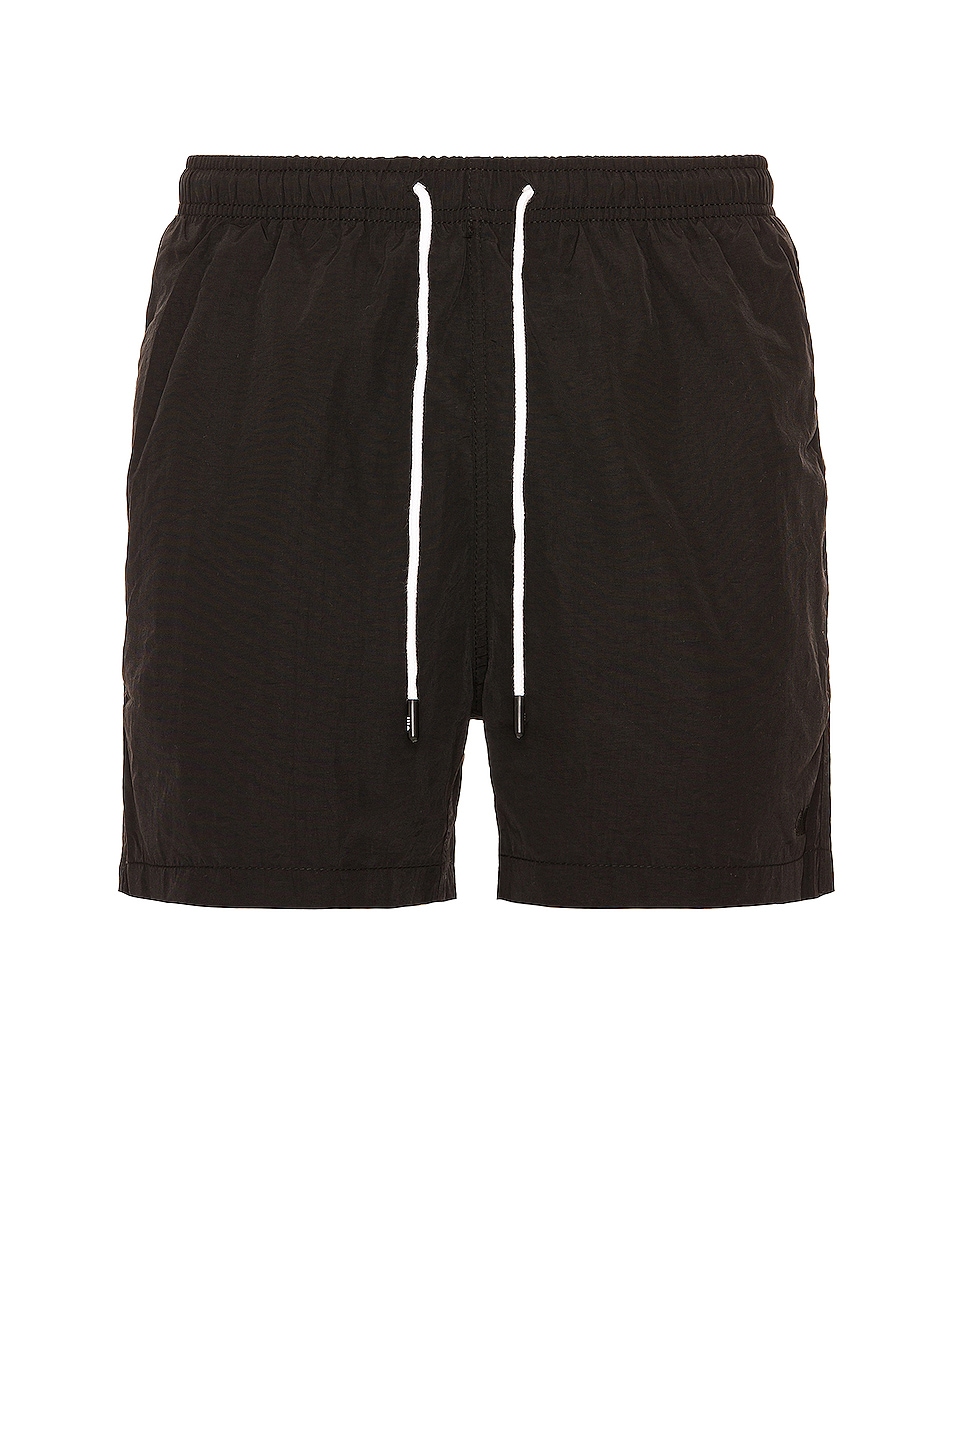 The Classic Shorts in Black